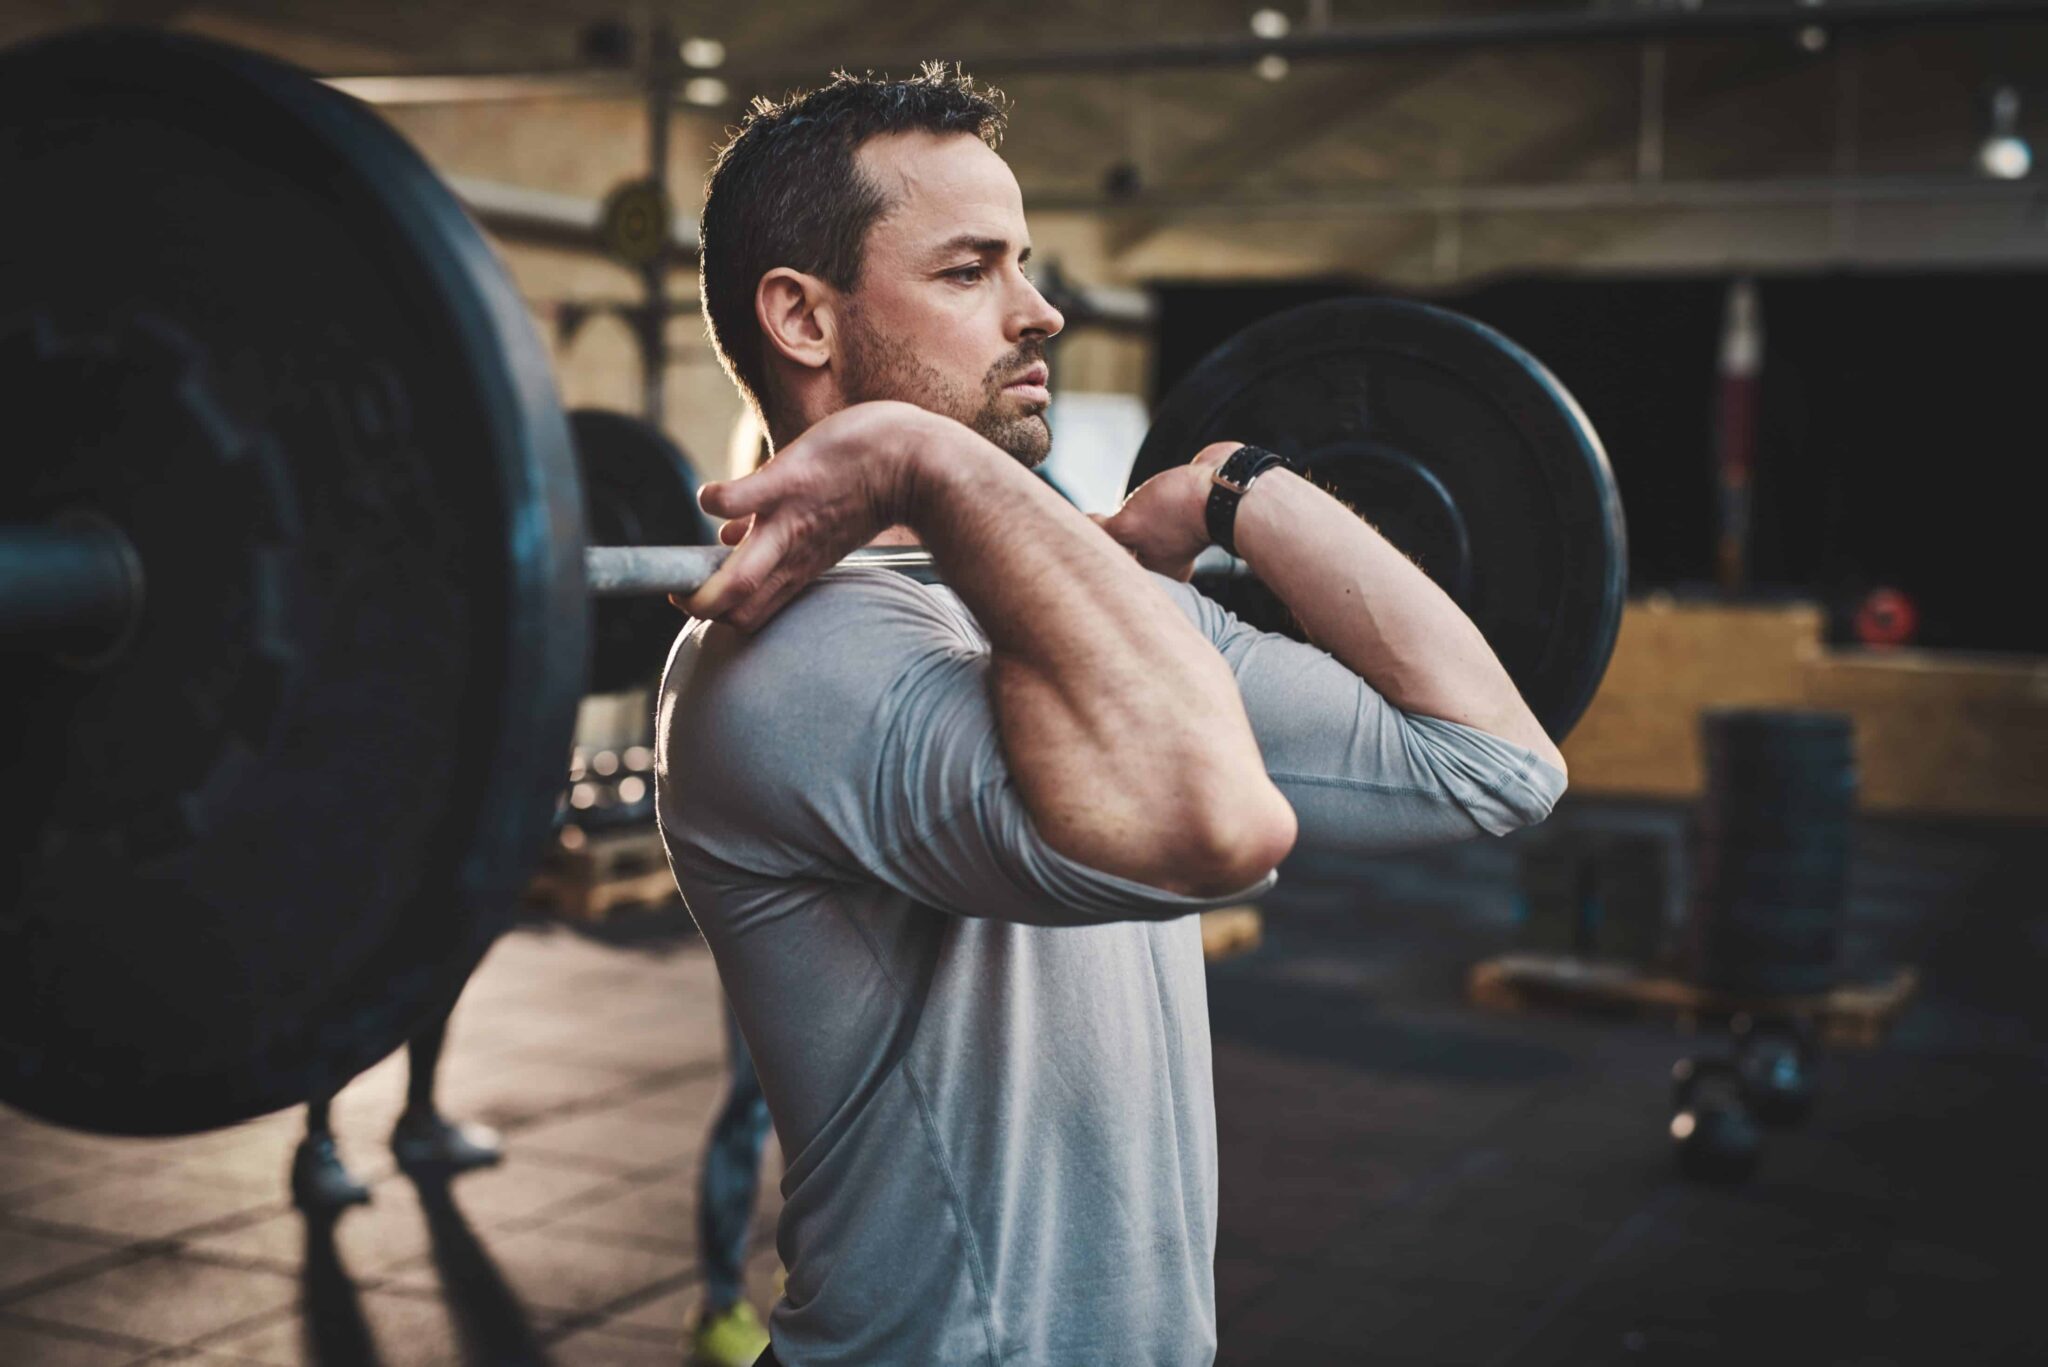 male in grey shirt performing a front barbell squat in a gym.